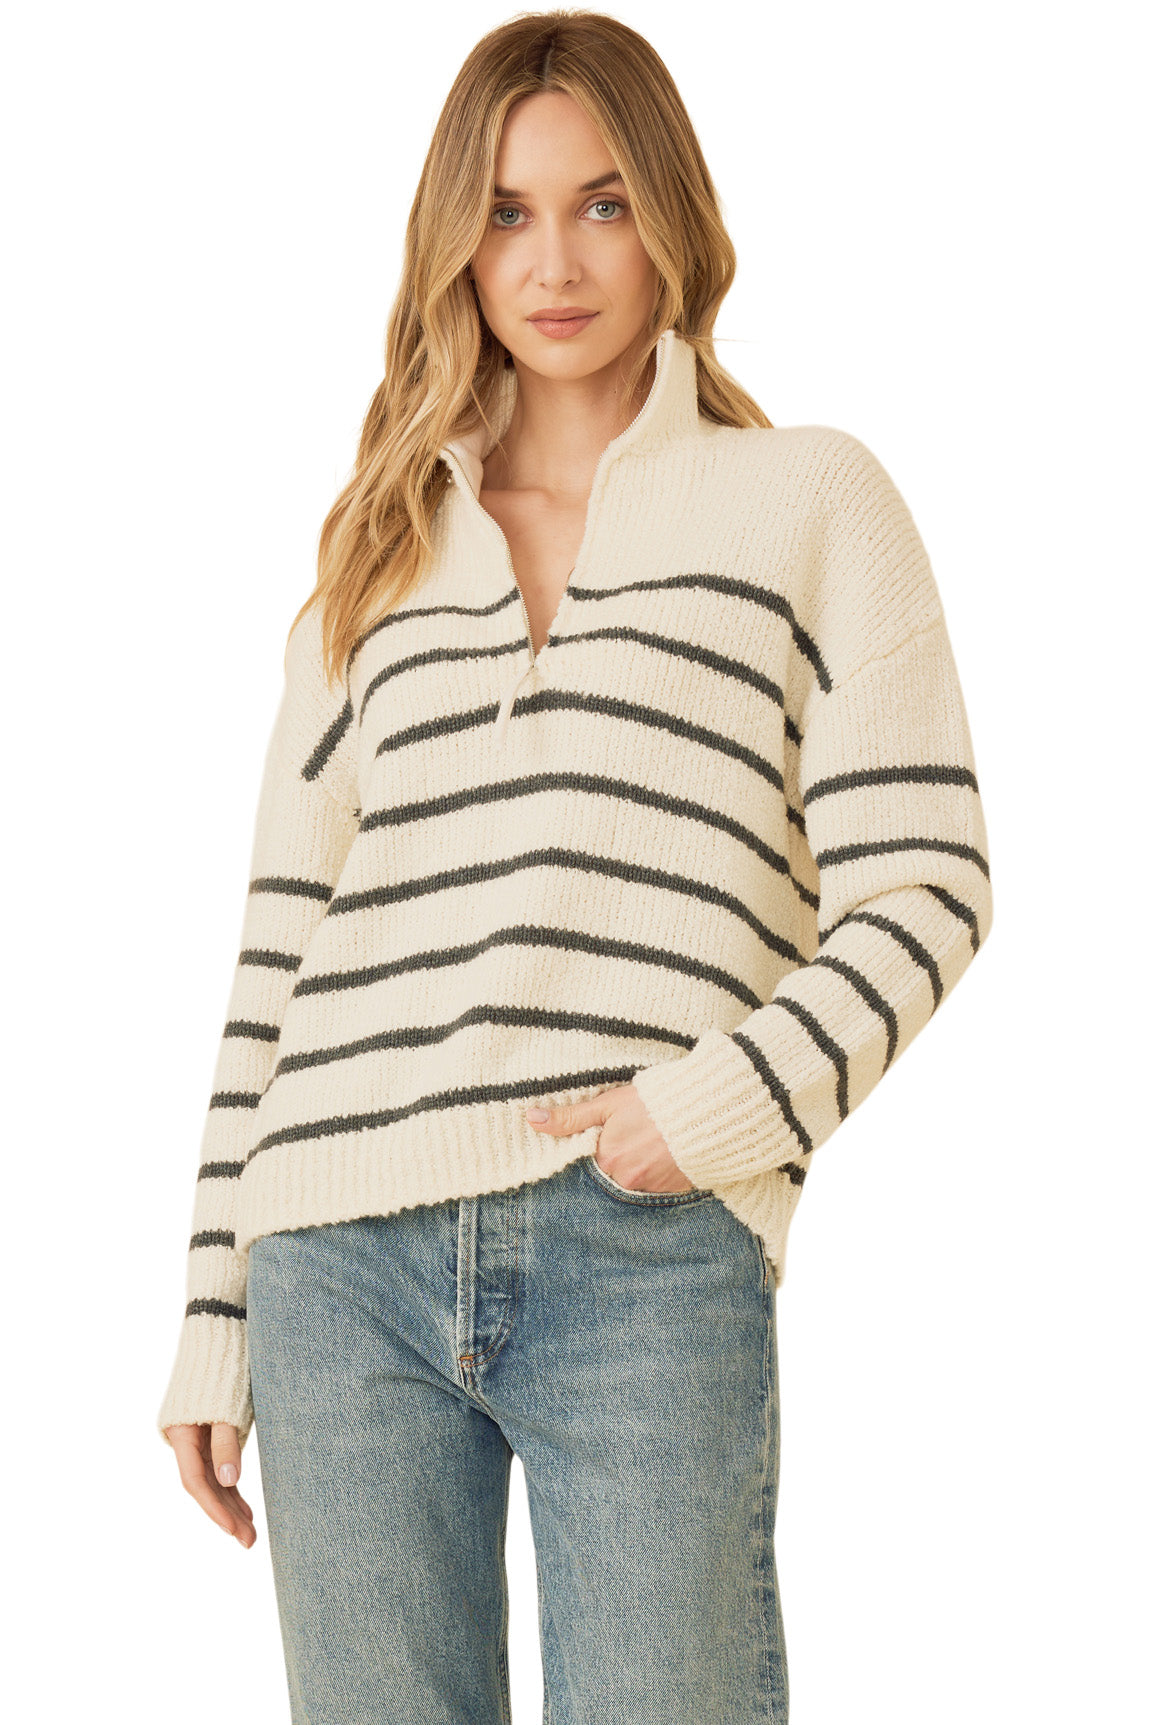 One Grey Day Sirelle Pullover in Ivory Combo